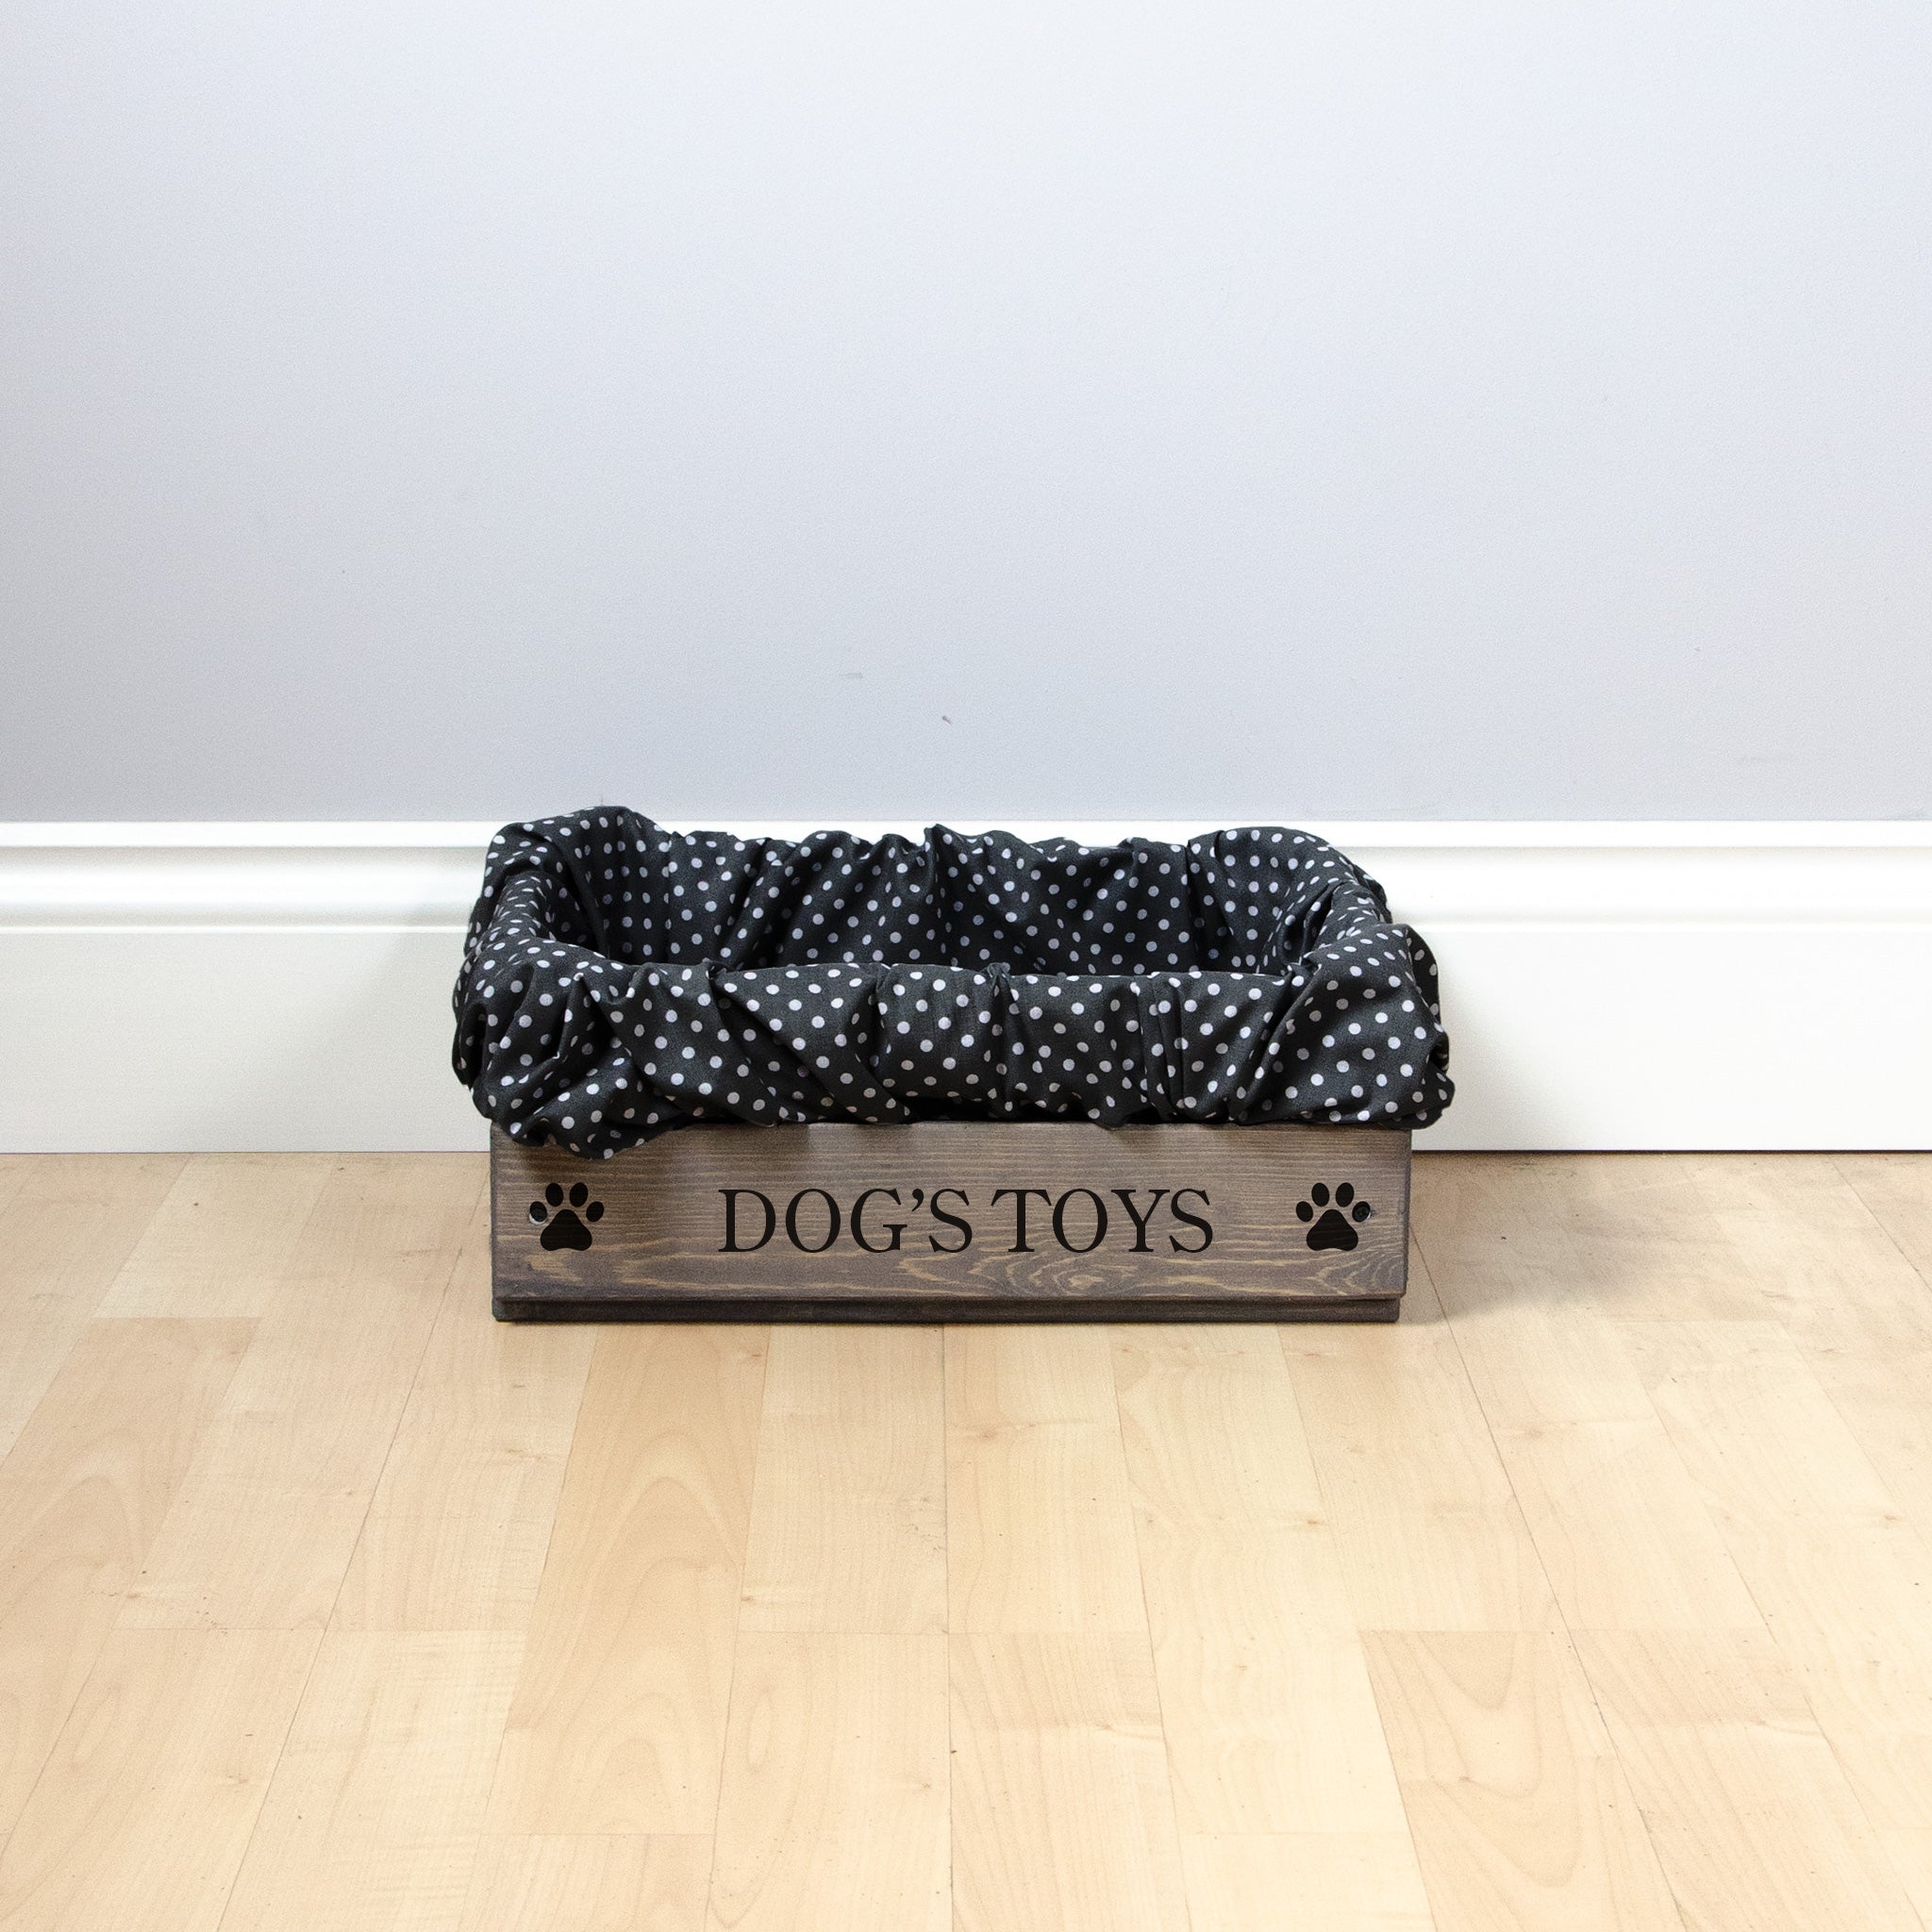 Small Personalised Dog Toy Box with Removable Liner (35 x 25 x 16cm) - Ash Grey